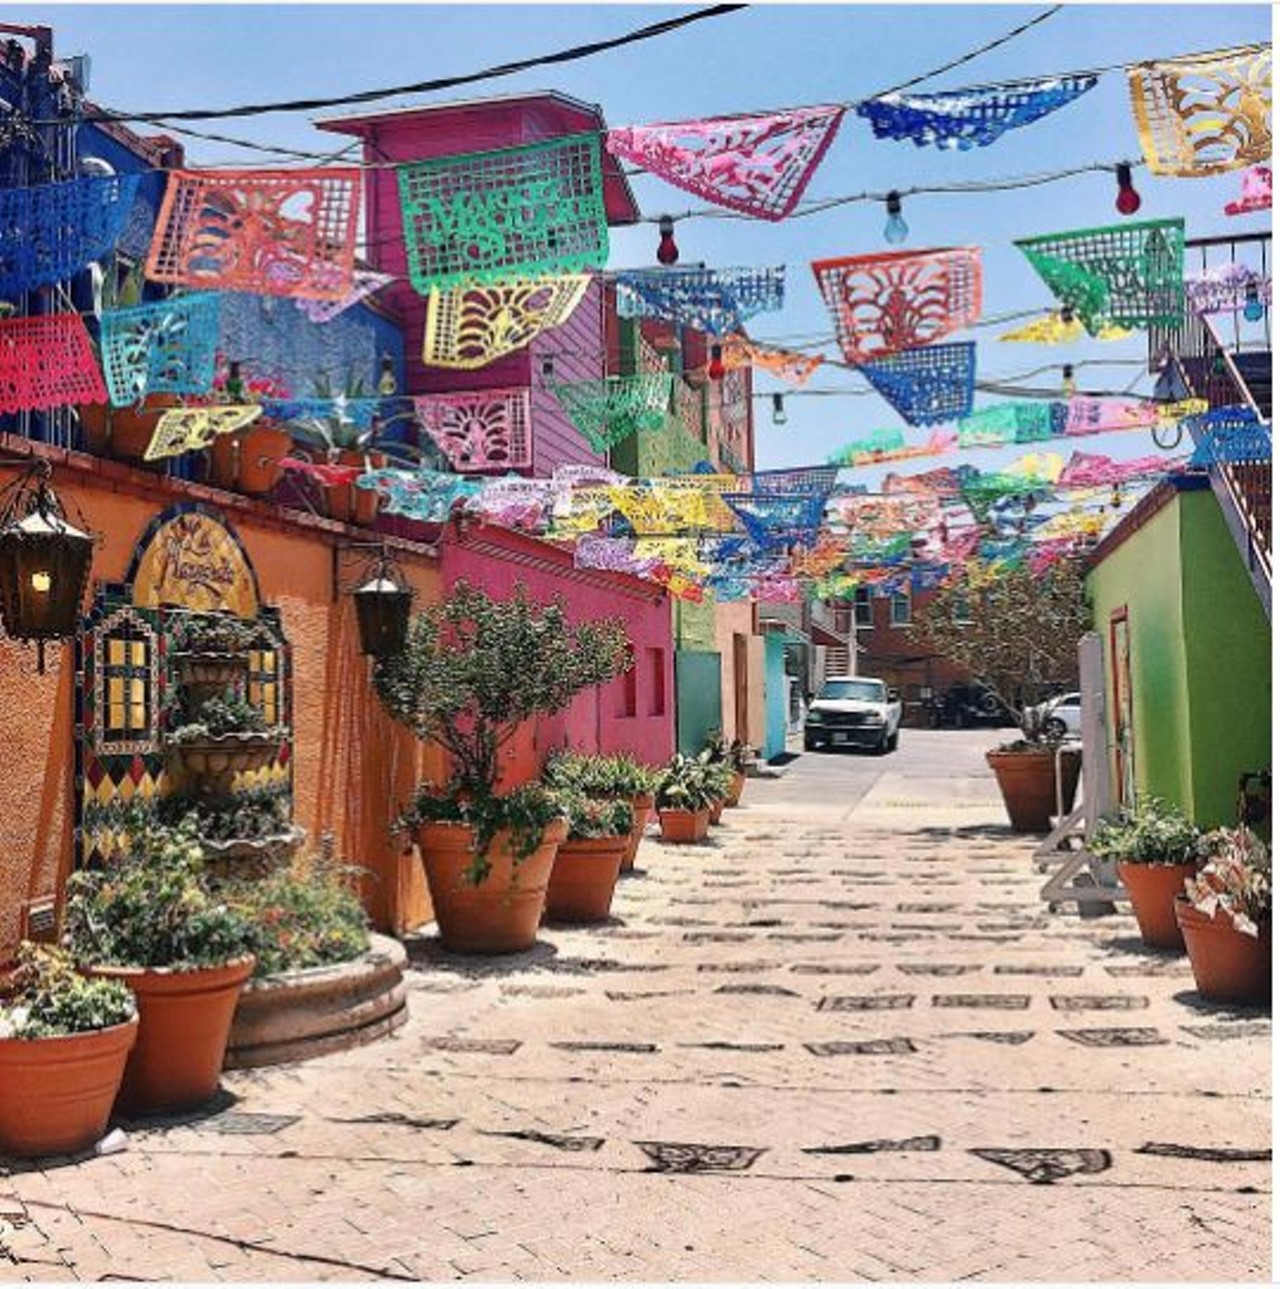 Walk around Market Square
(210) 207-8600 514 W Commerce St,
getcreativesanantonio.com
Want to feel like tourist for a day? Window shopping at Market Square is where to go. Enjoy the sights, sound and drinks all at a reasonable price.
Photo via Instagram 
betsmai
